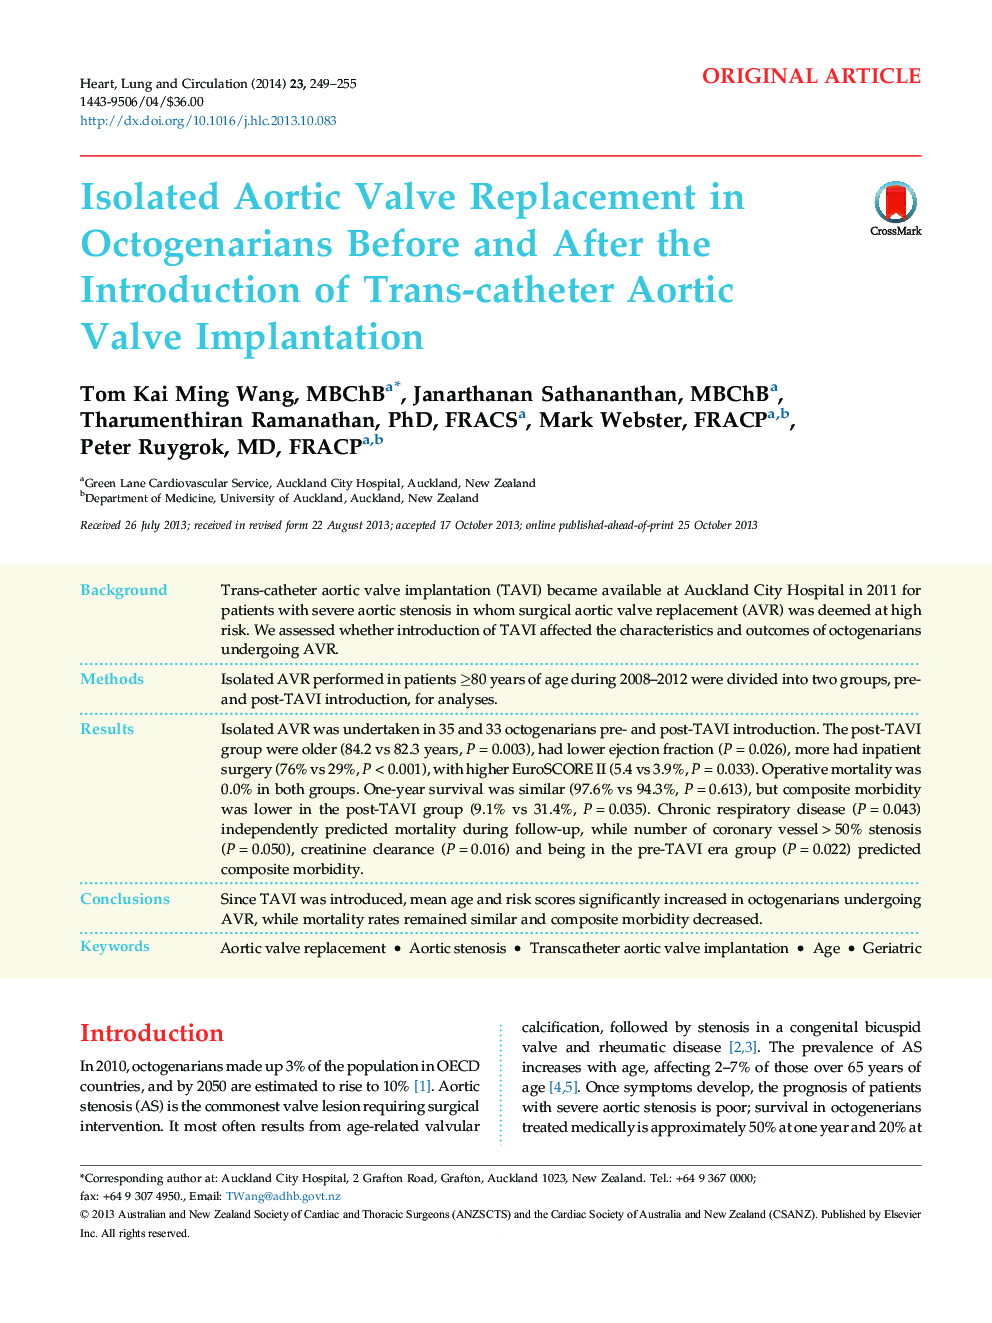 Isolated Aortic Valve Replacement in Octogenarians Before and After the Introduction of Trans-catheter Aortic Valve Implantation